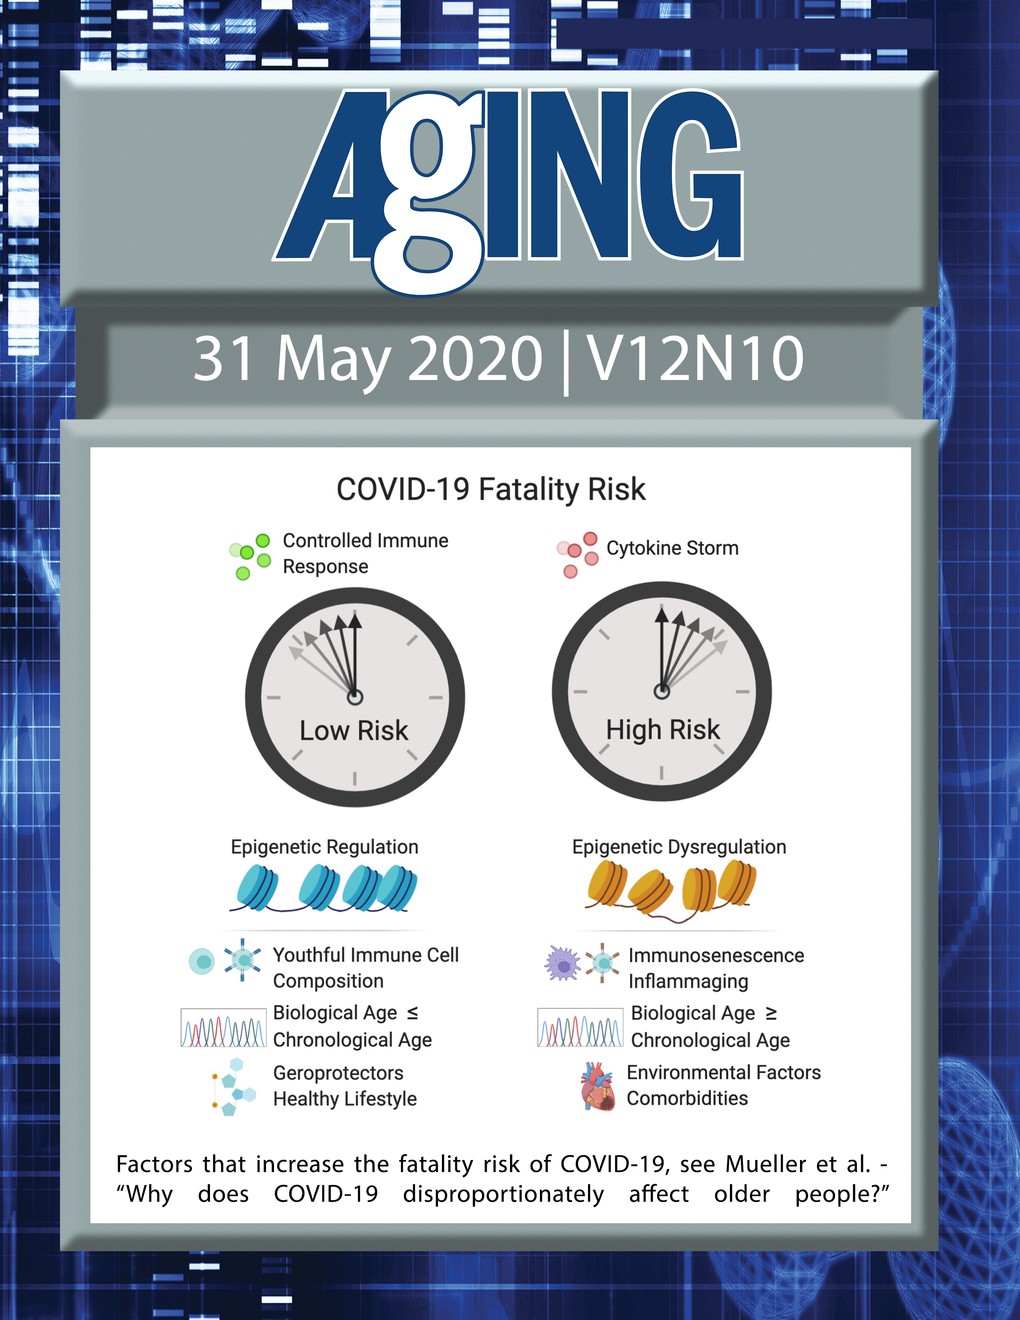 The cover features Figure 2 "Factors that increase the fatality risk of COVID-19“ from Mueller et al.